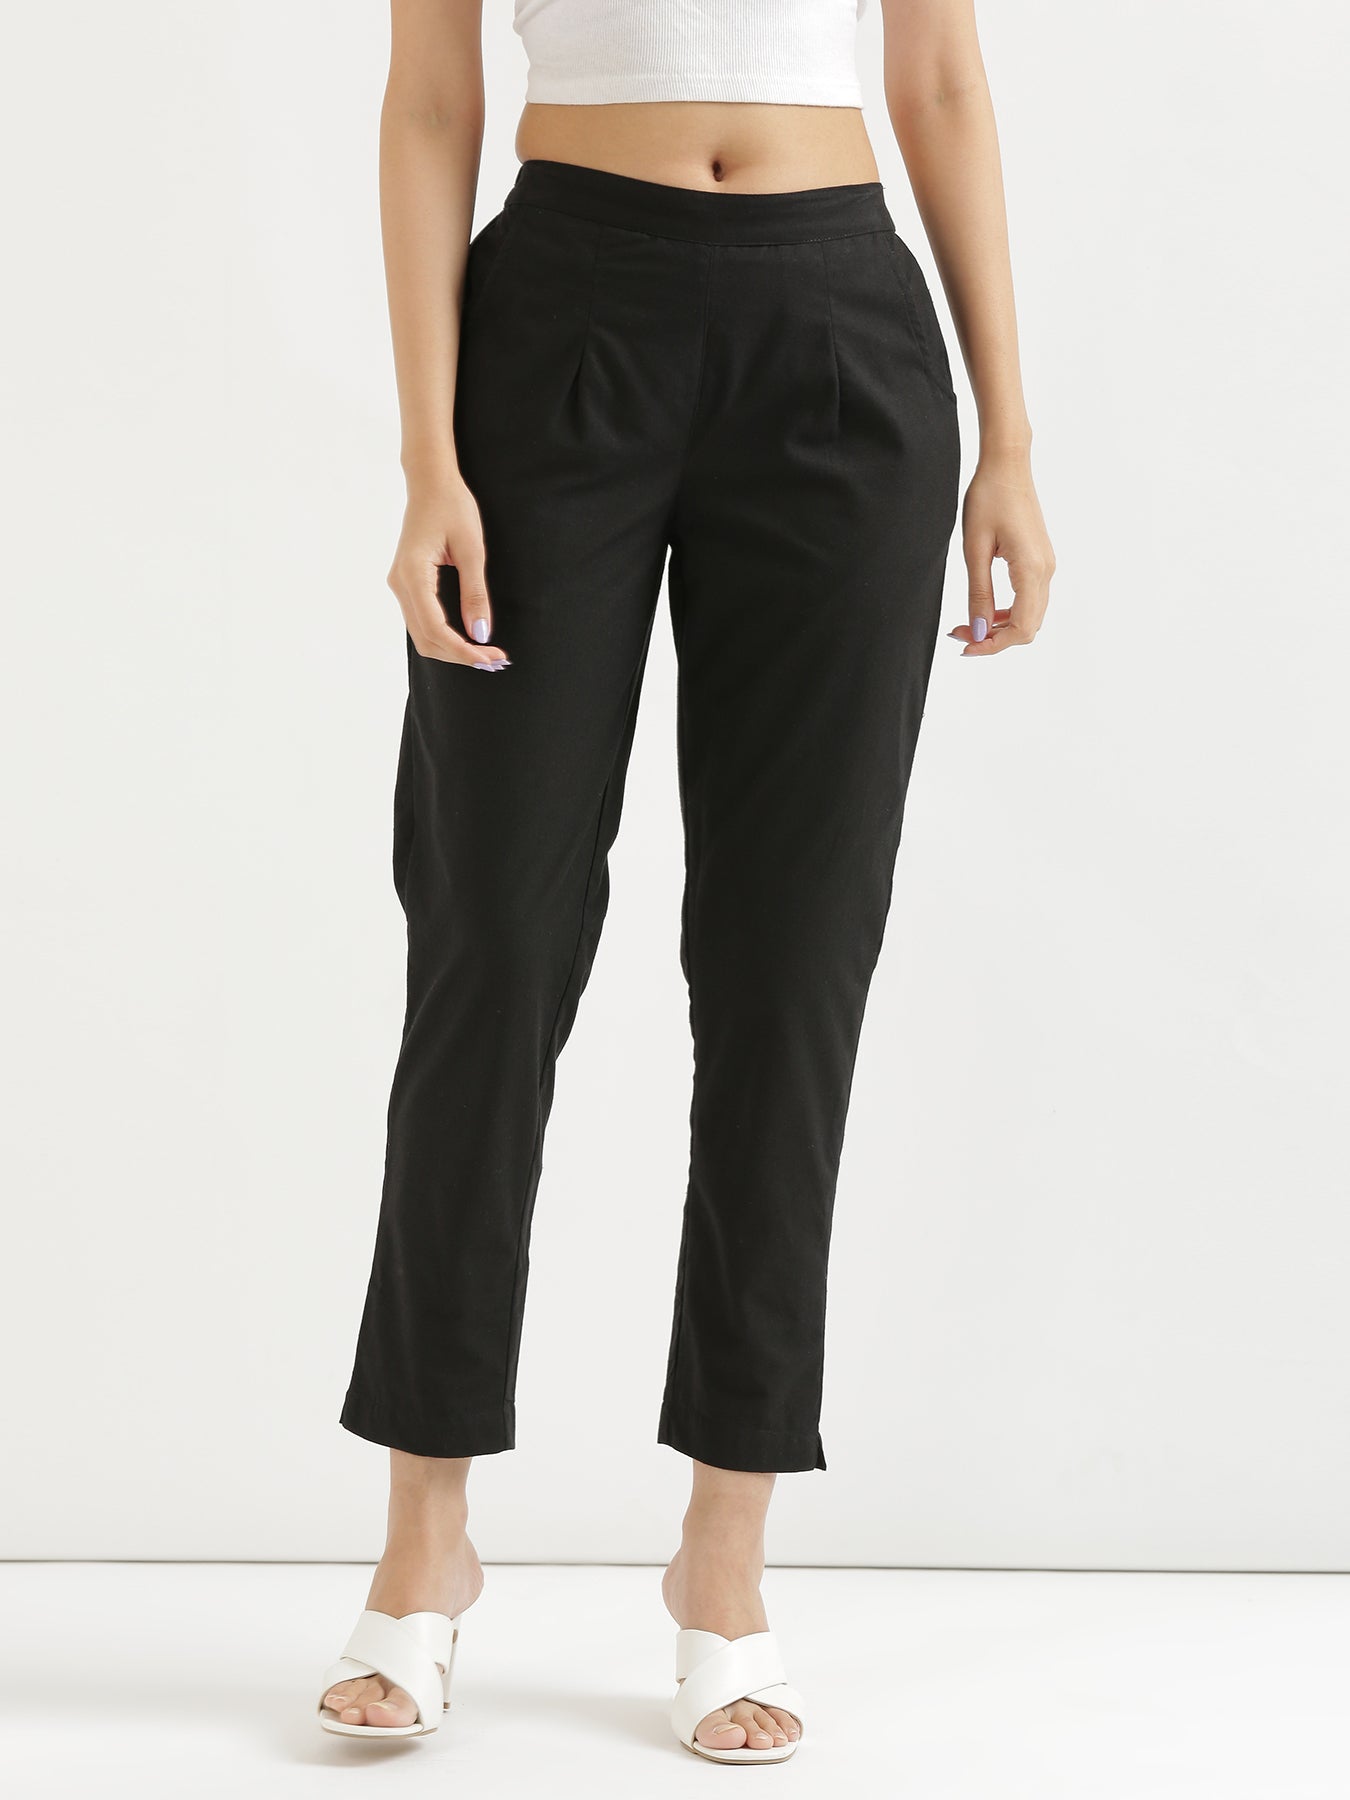 A-Plus Regular Fit Women Black Trousers - Buy A-Plus Regular Fit Women Black  Trousers Online at Best Prices in India | Flipkart.com